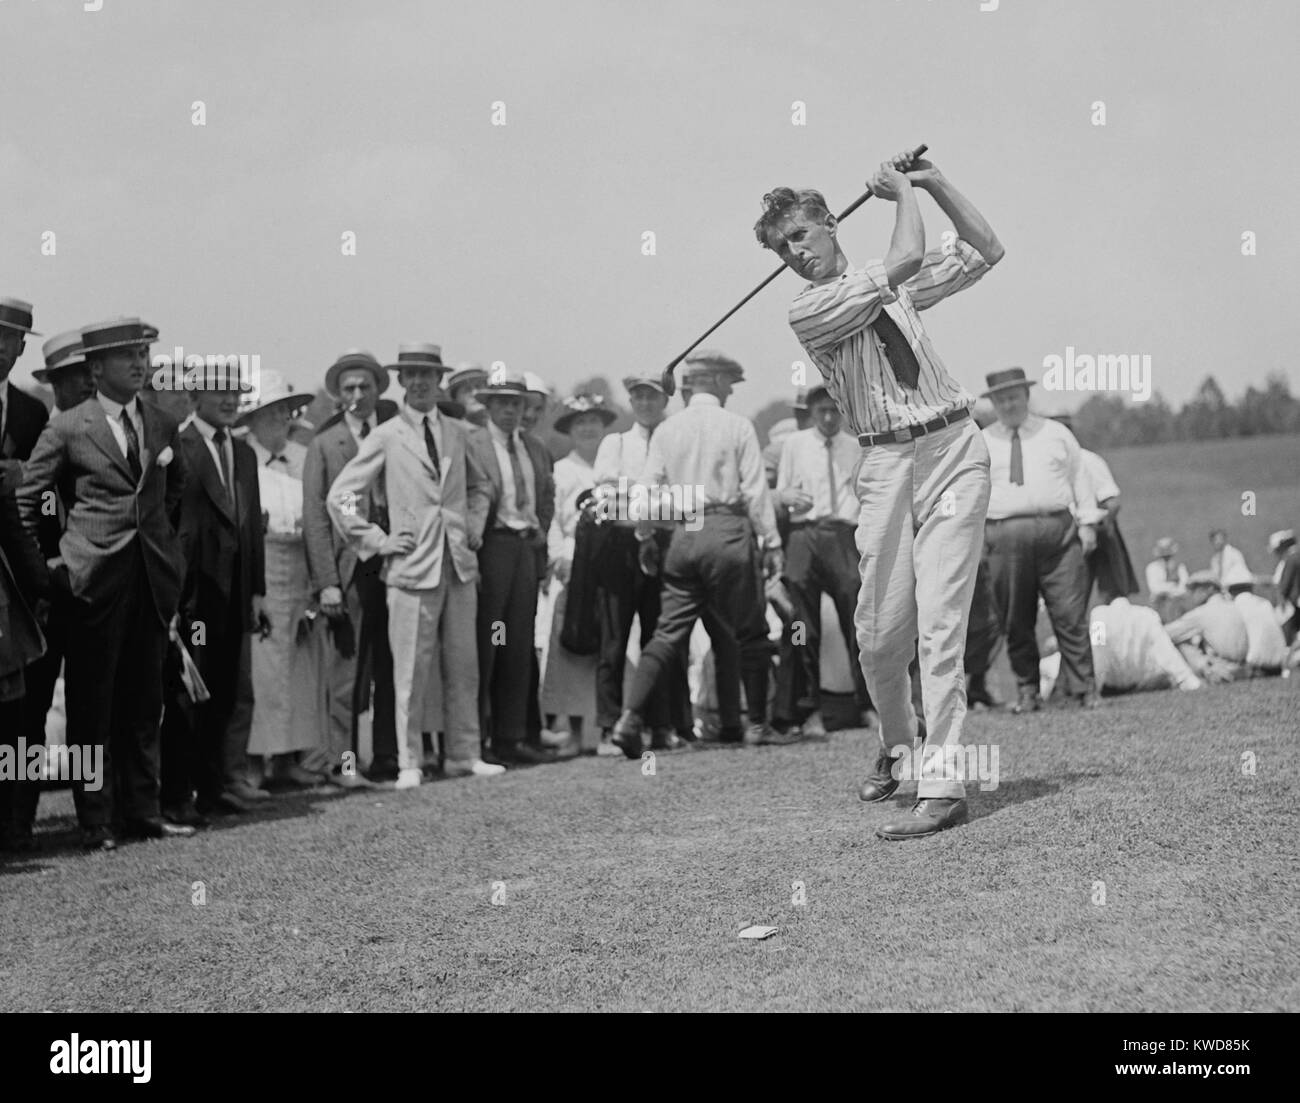 English Golfer Jim Barnes in 1921. He moved to the U. S. where he played professional golf from 1906. He won four majors: PGA Championship in 1916 and 1919; U.S. Open in 1921; The Open Championship, 1925. (BSLOC 2015 17 107) Stock Photo